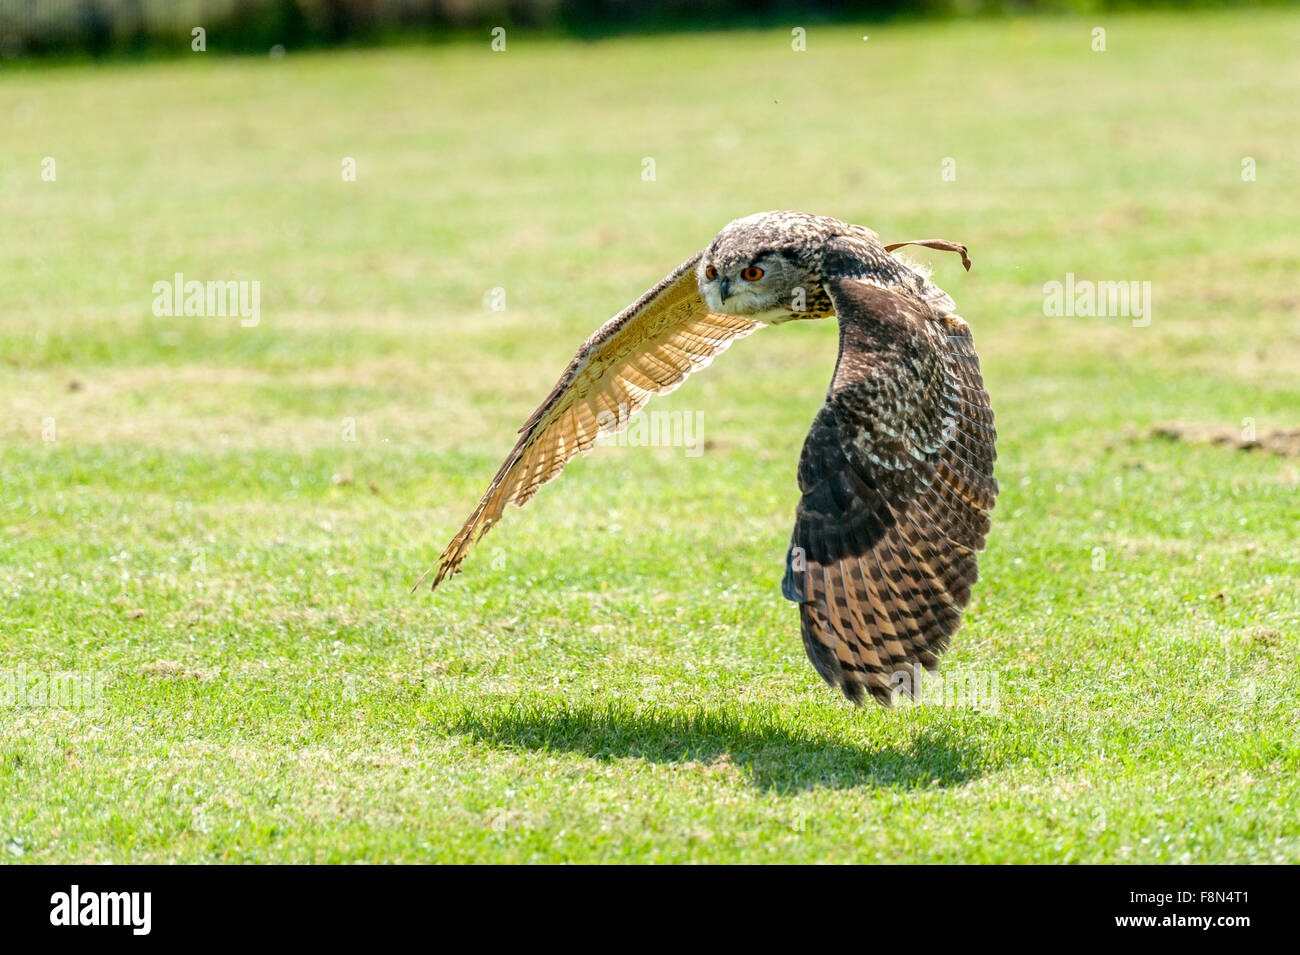 Flying owl over green grass at display Stock Photo